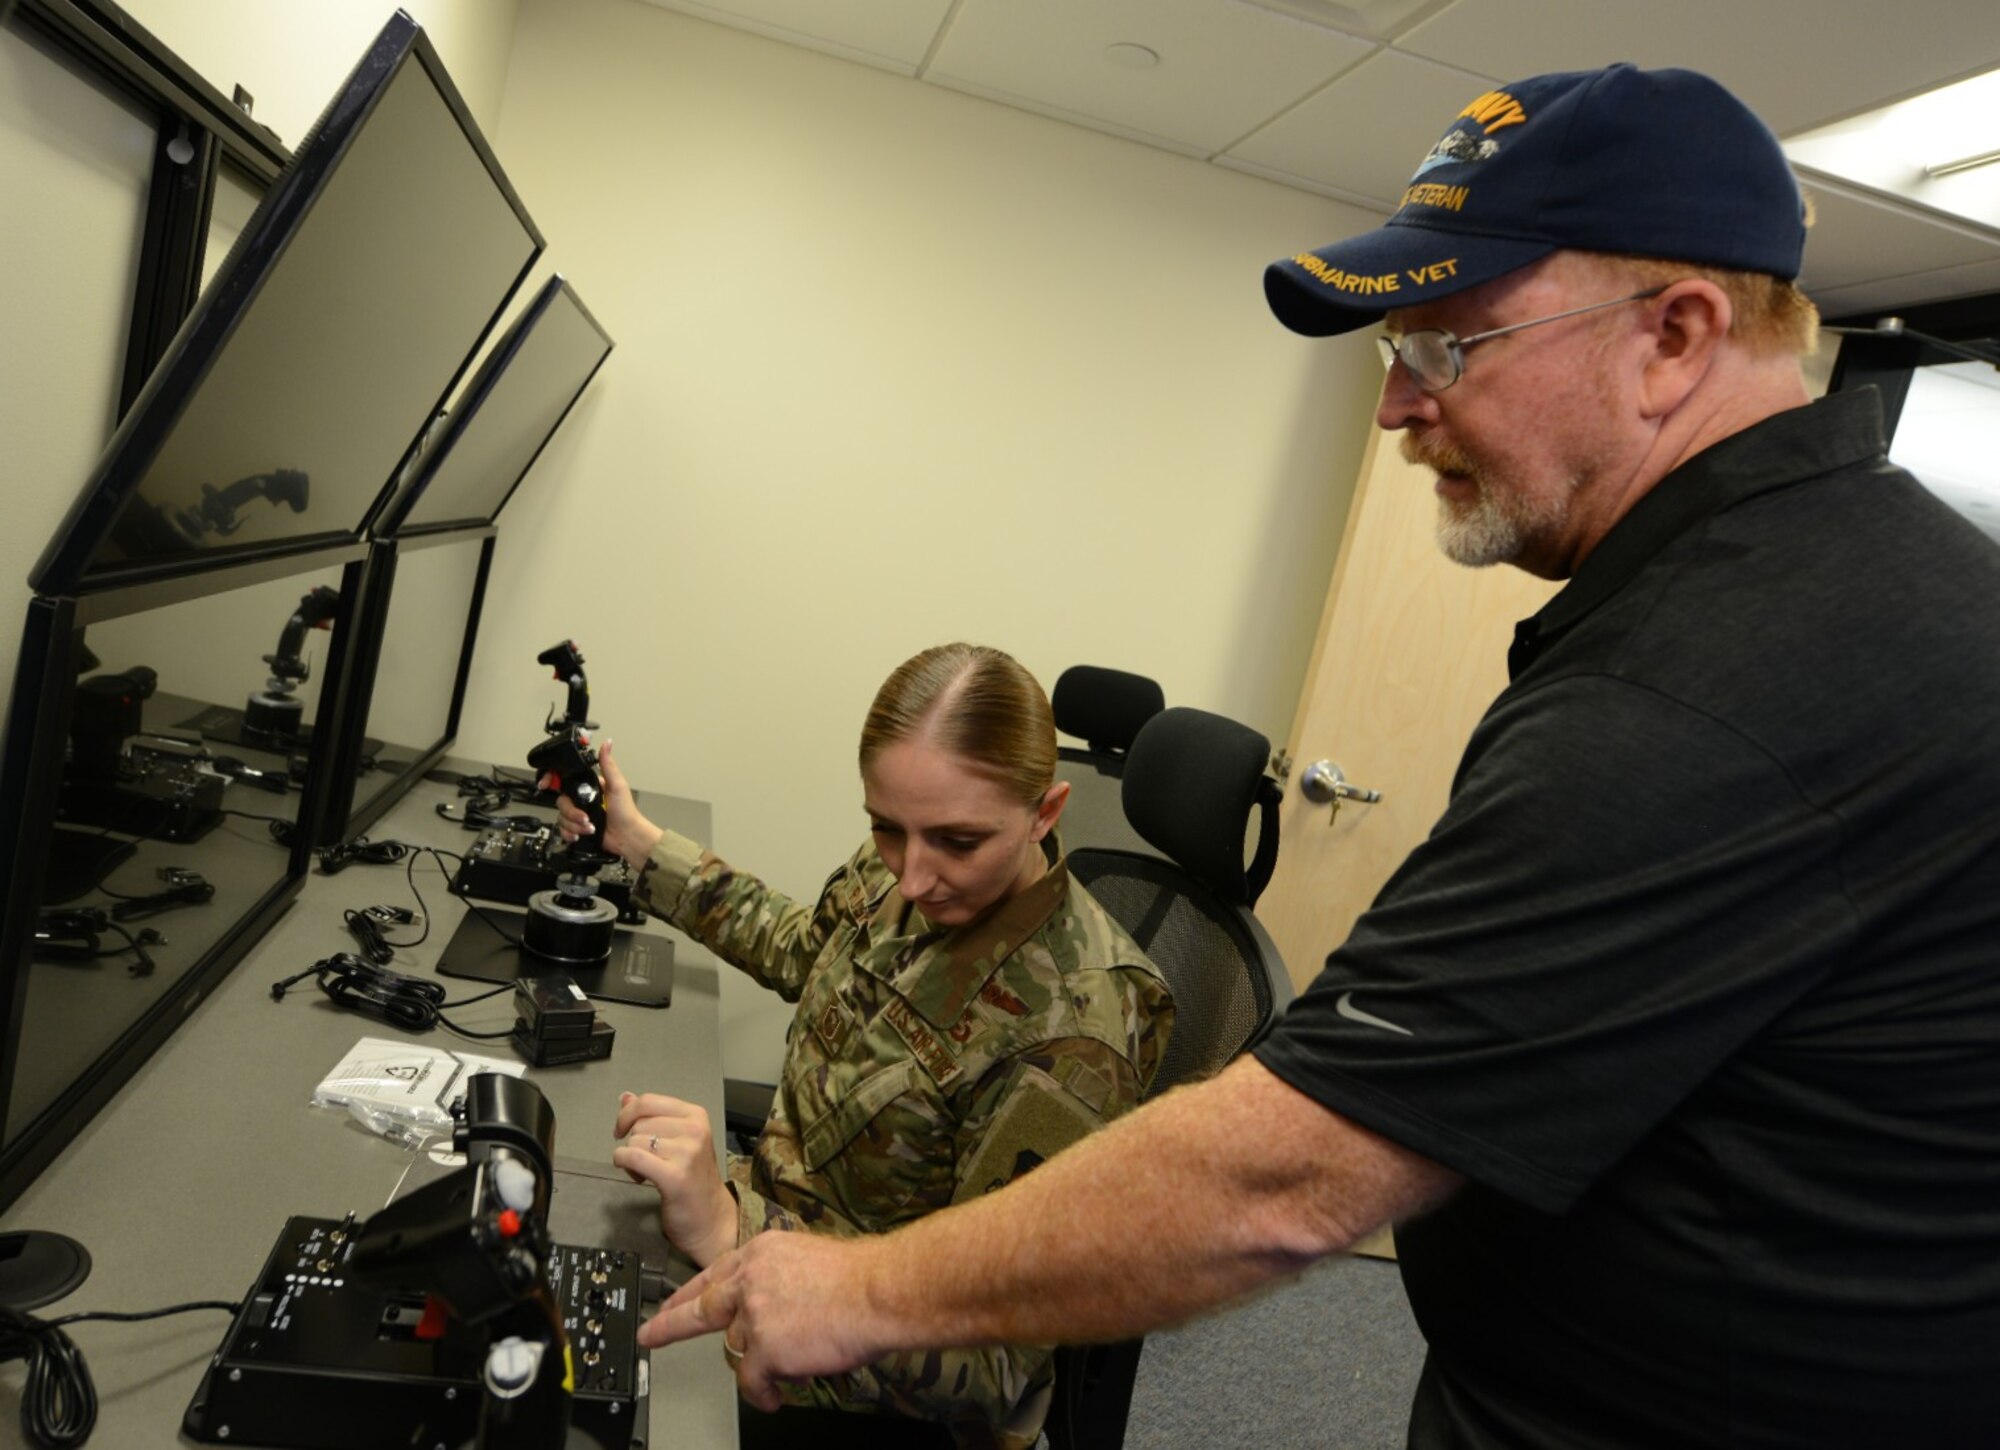 Red Hoar, a software development program manager, teaches Master Sgt. Bonnie Rushing, a military and strategic studies instructor at the U.S. Air Force Academy, to operate the remotely piloted aircraft control room in the school’s multi domain laboratory, July 22, 2021.